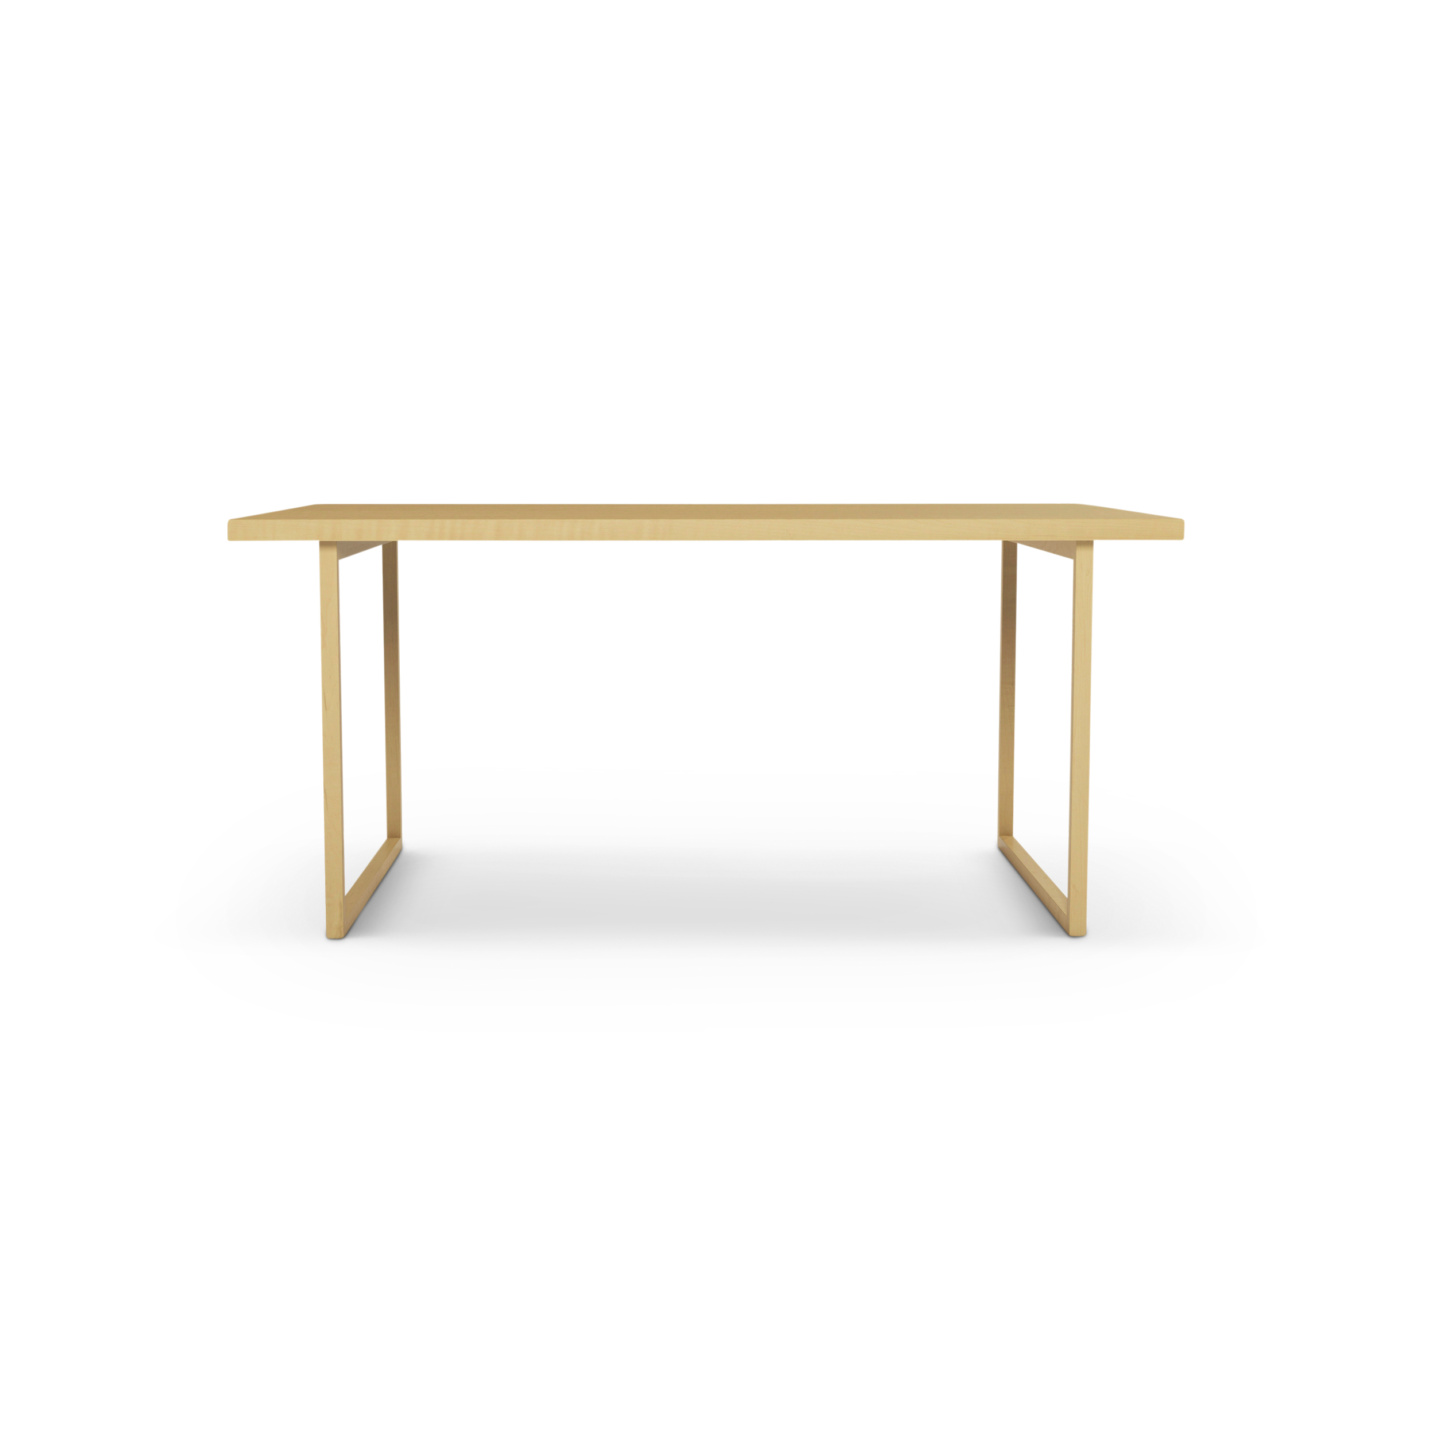 maple tailored table with a solid maple top